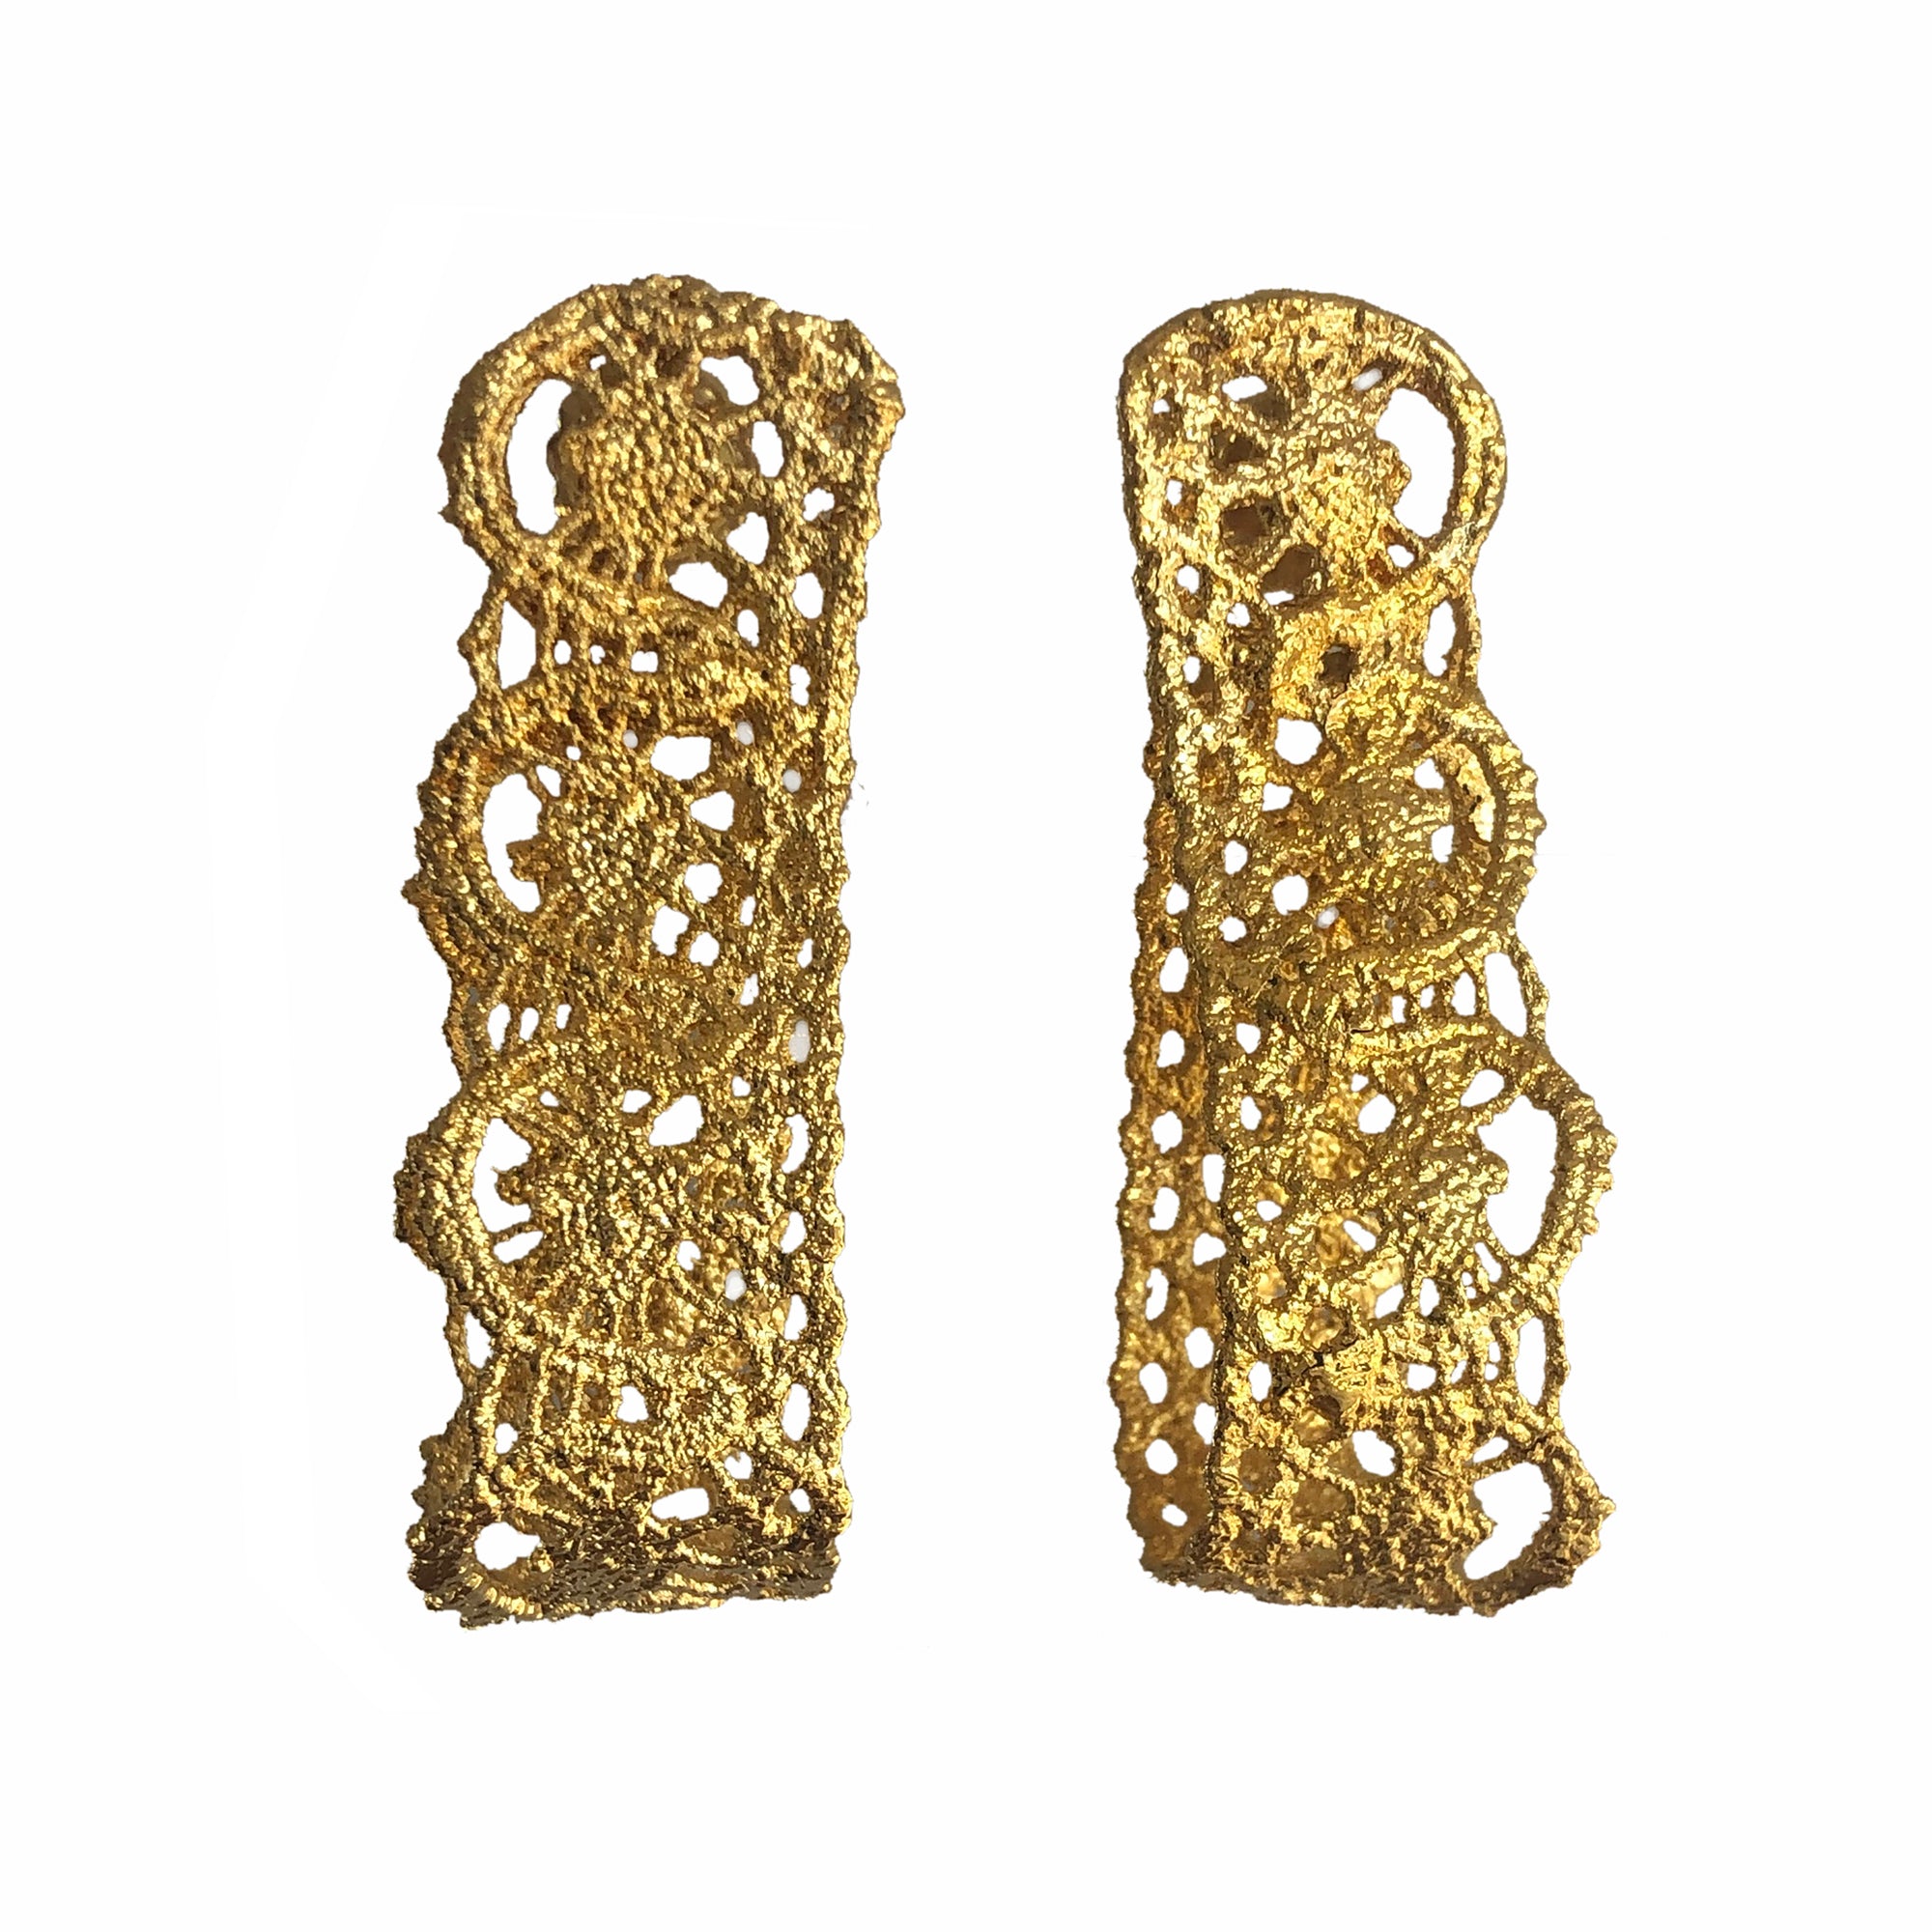 Favorite earrings made from French 1920s lace forming a loop and solidified in 24k gold.